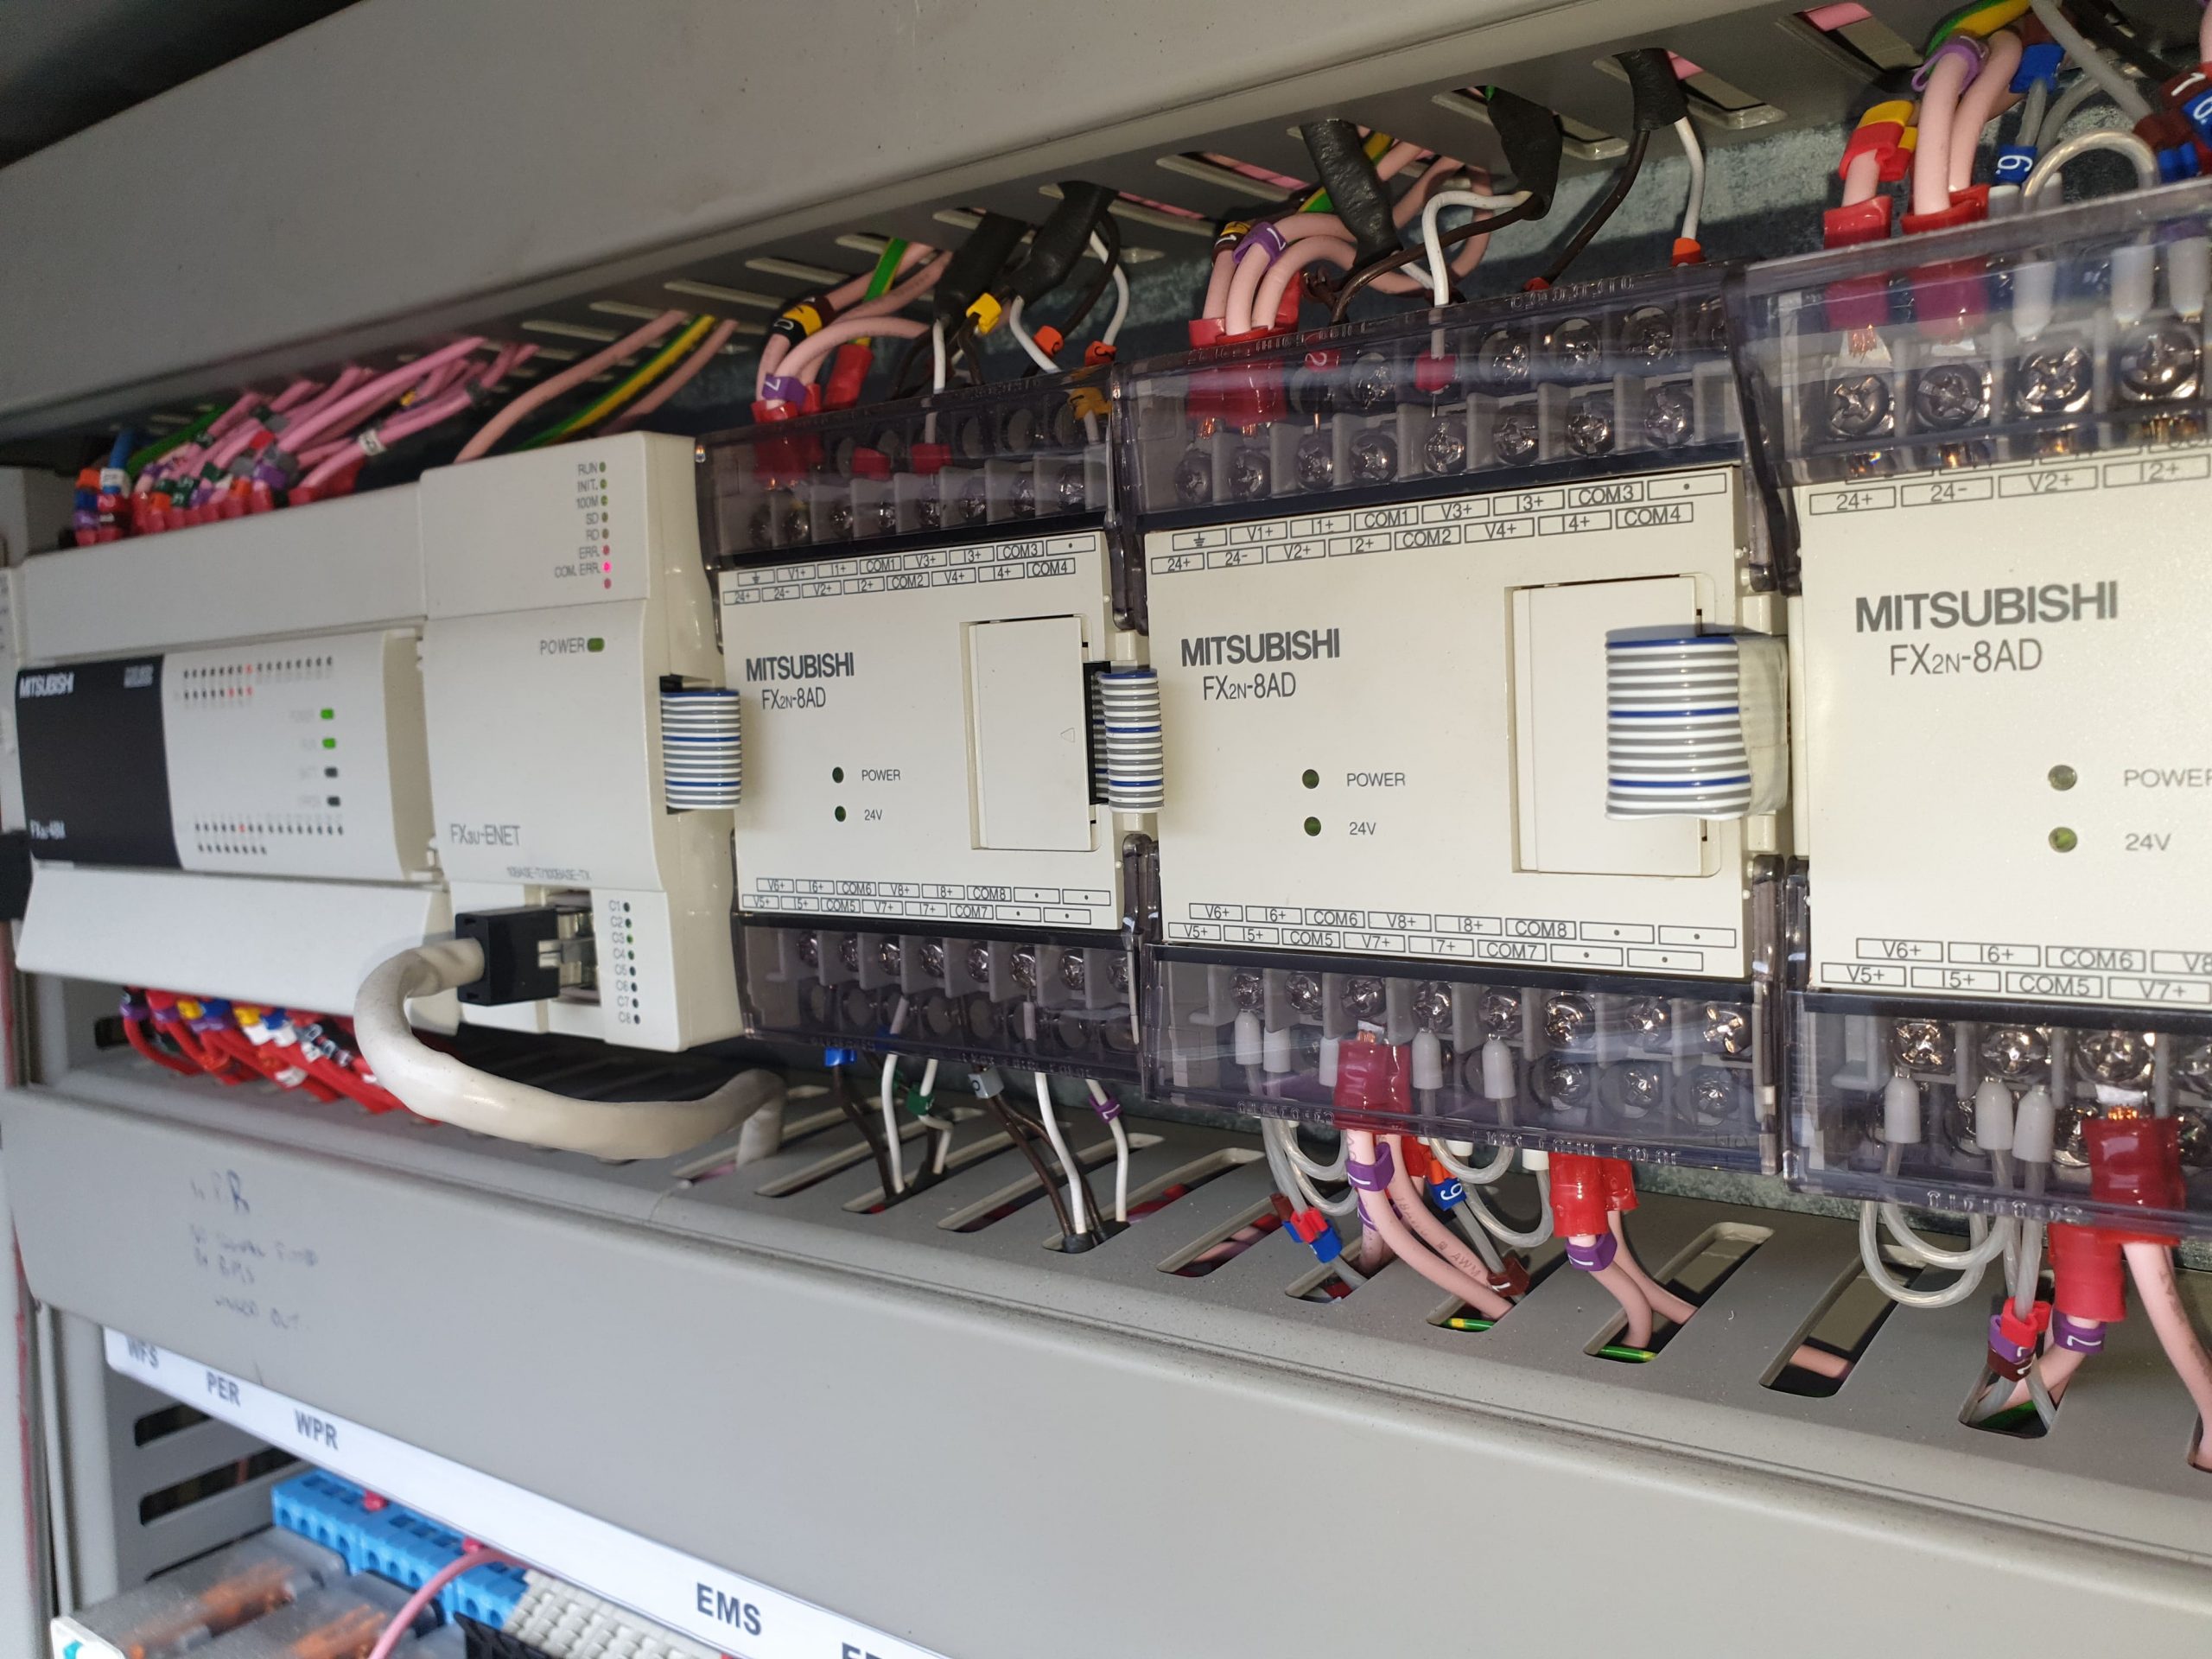 PLC and relay board in a panel during chiller service company visit